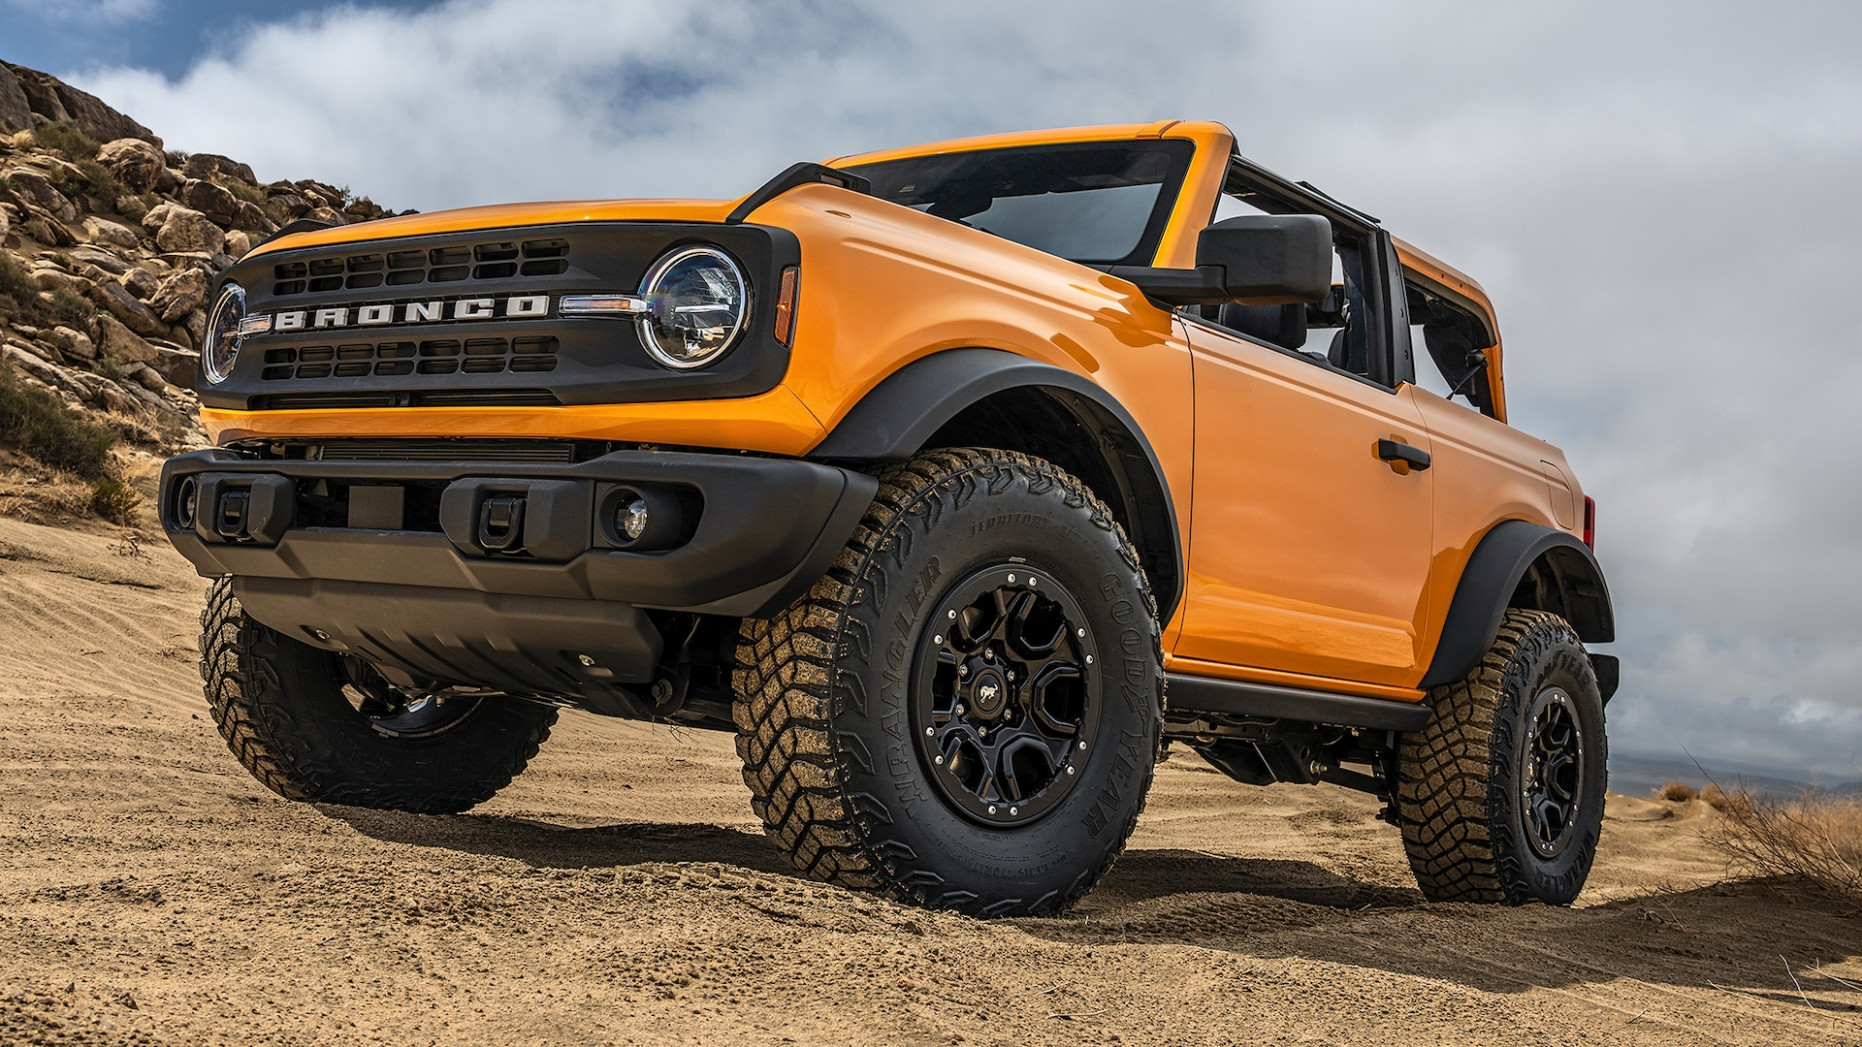 3 Ford Bronco Sasquatch Package Explained: Yes, You Can Get 3 Bronco Sasquatch 4 Door